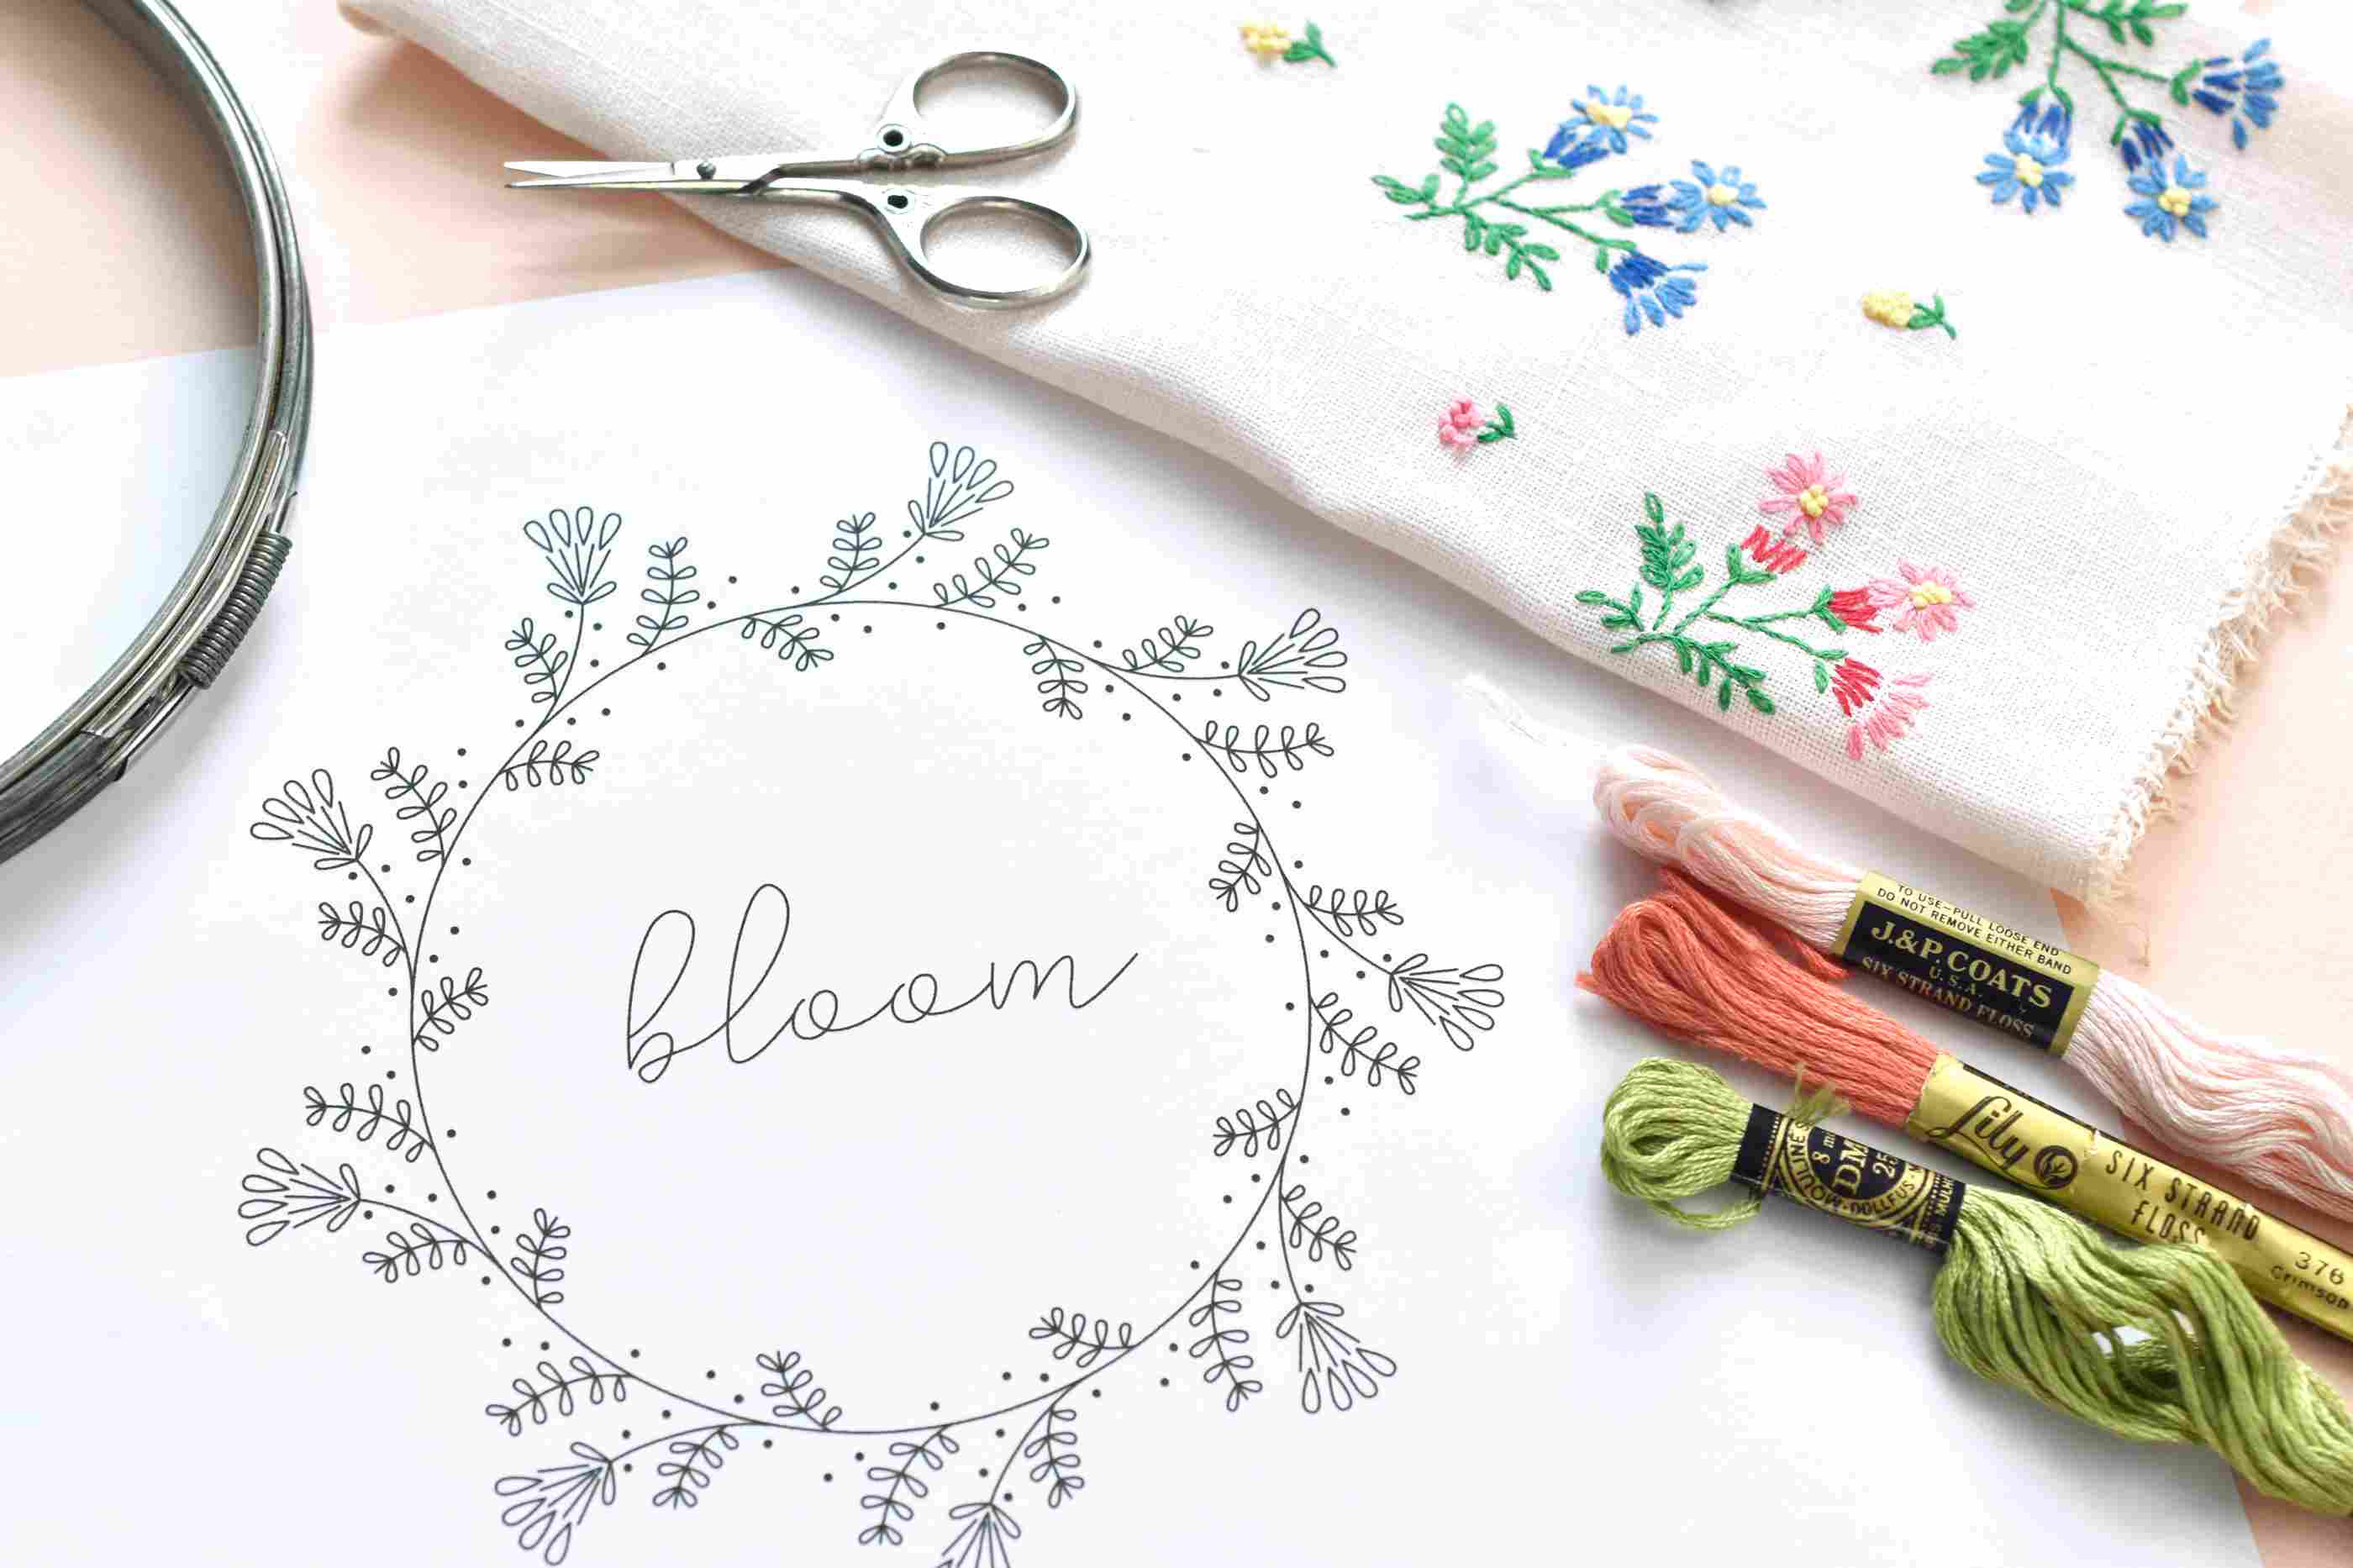 French Embroidery Patterns Free Vintage Inspired Bloom Embroidery Pattern